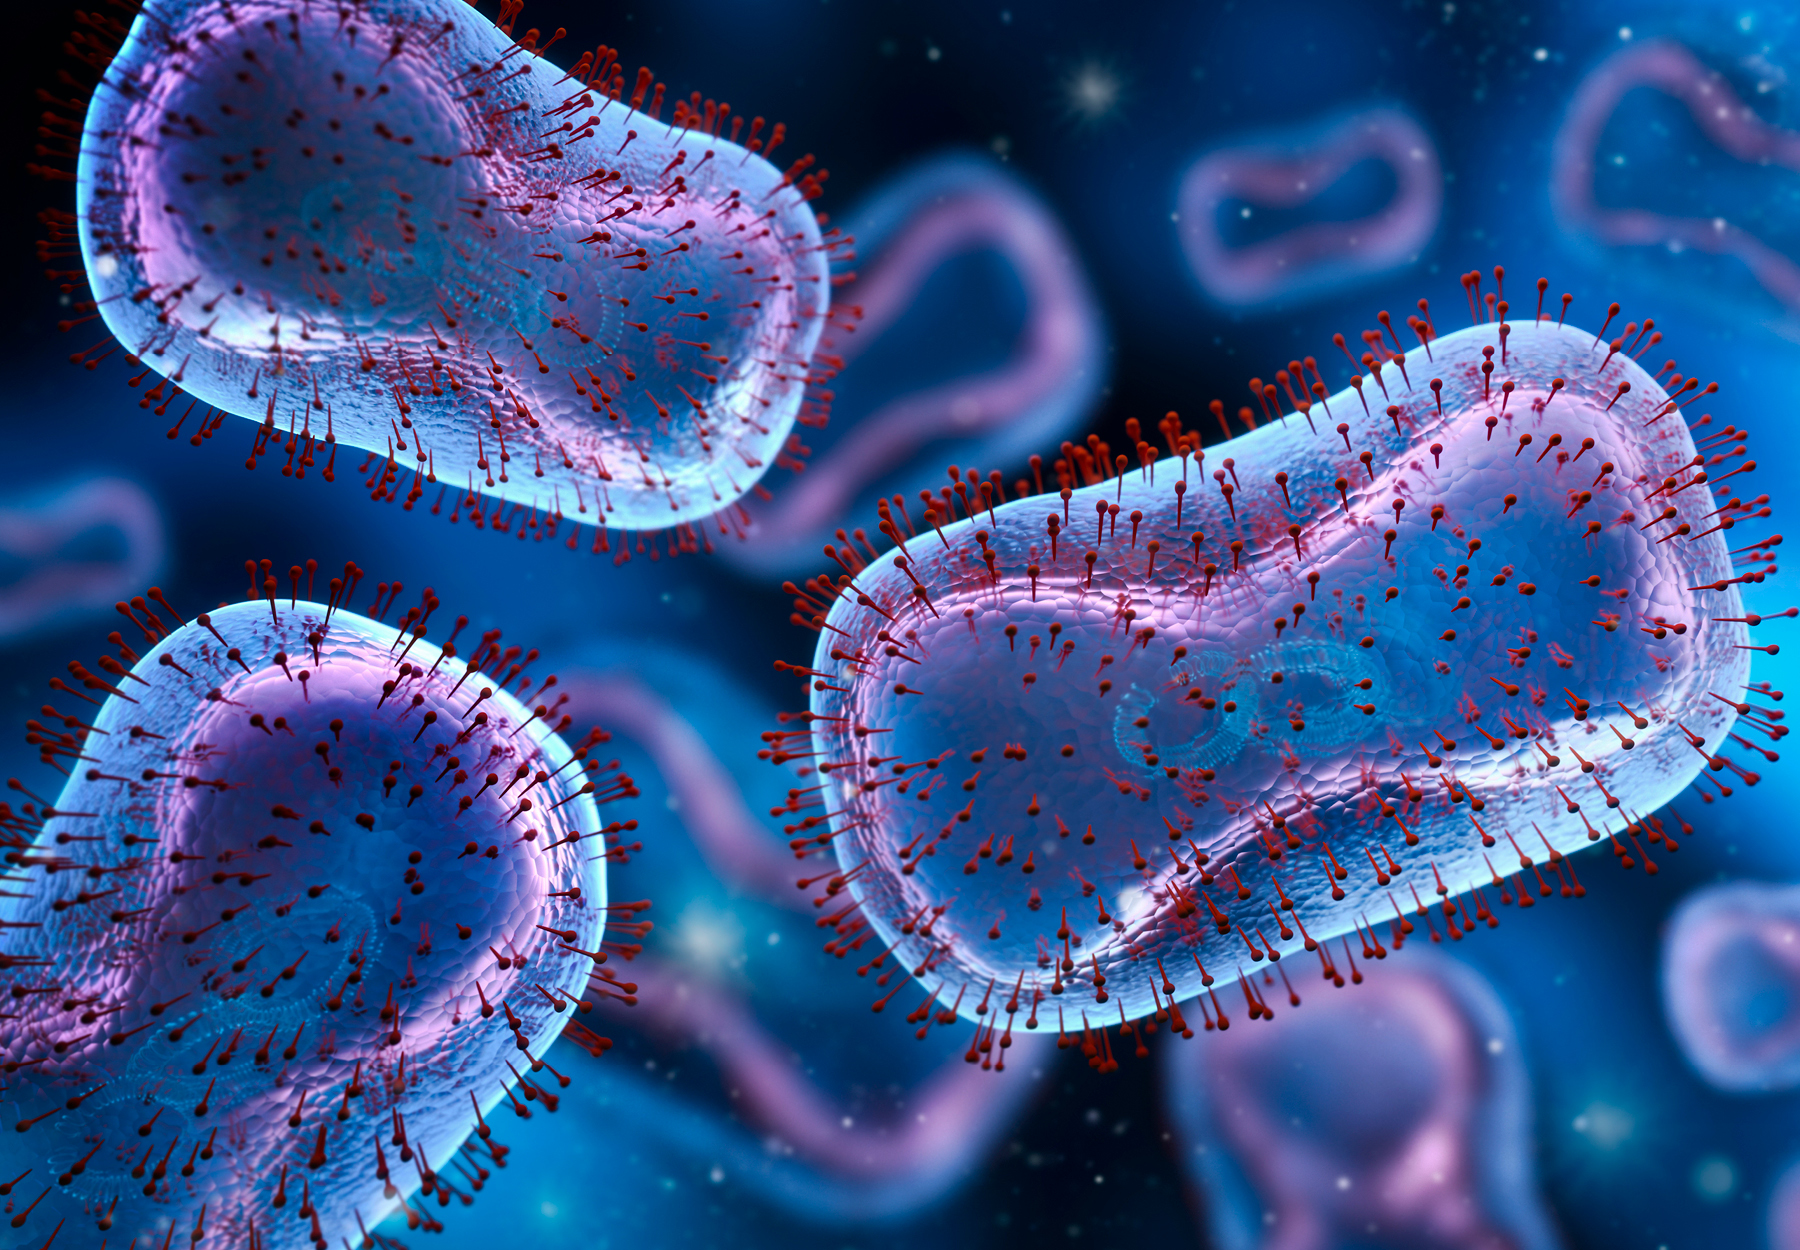 A blue, red, and purple illustration of the monkeypox virus. Stock illustration.